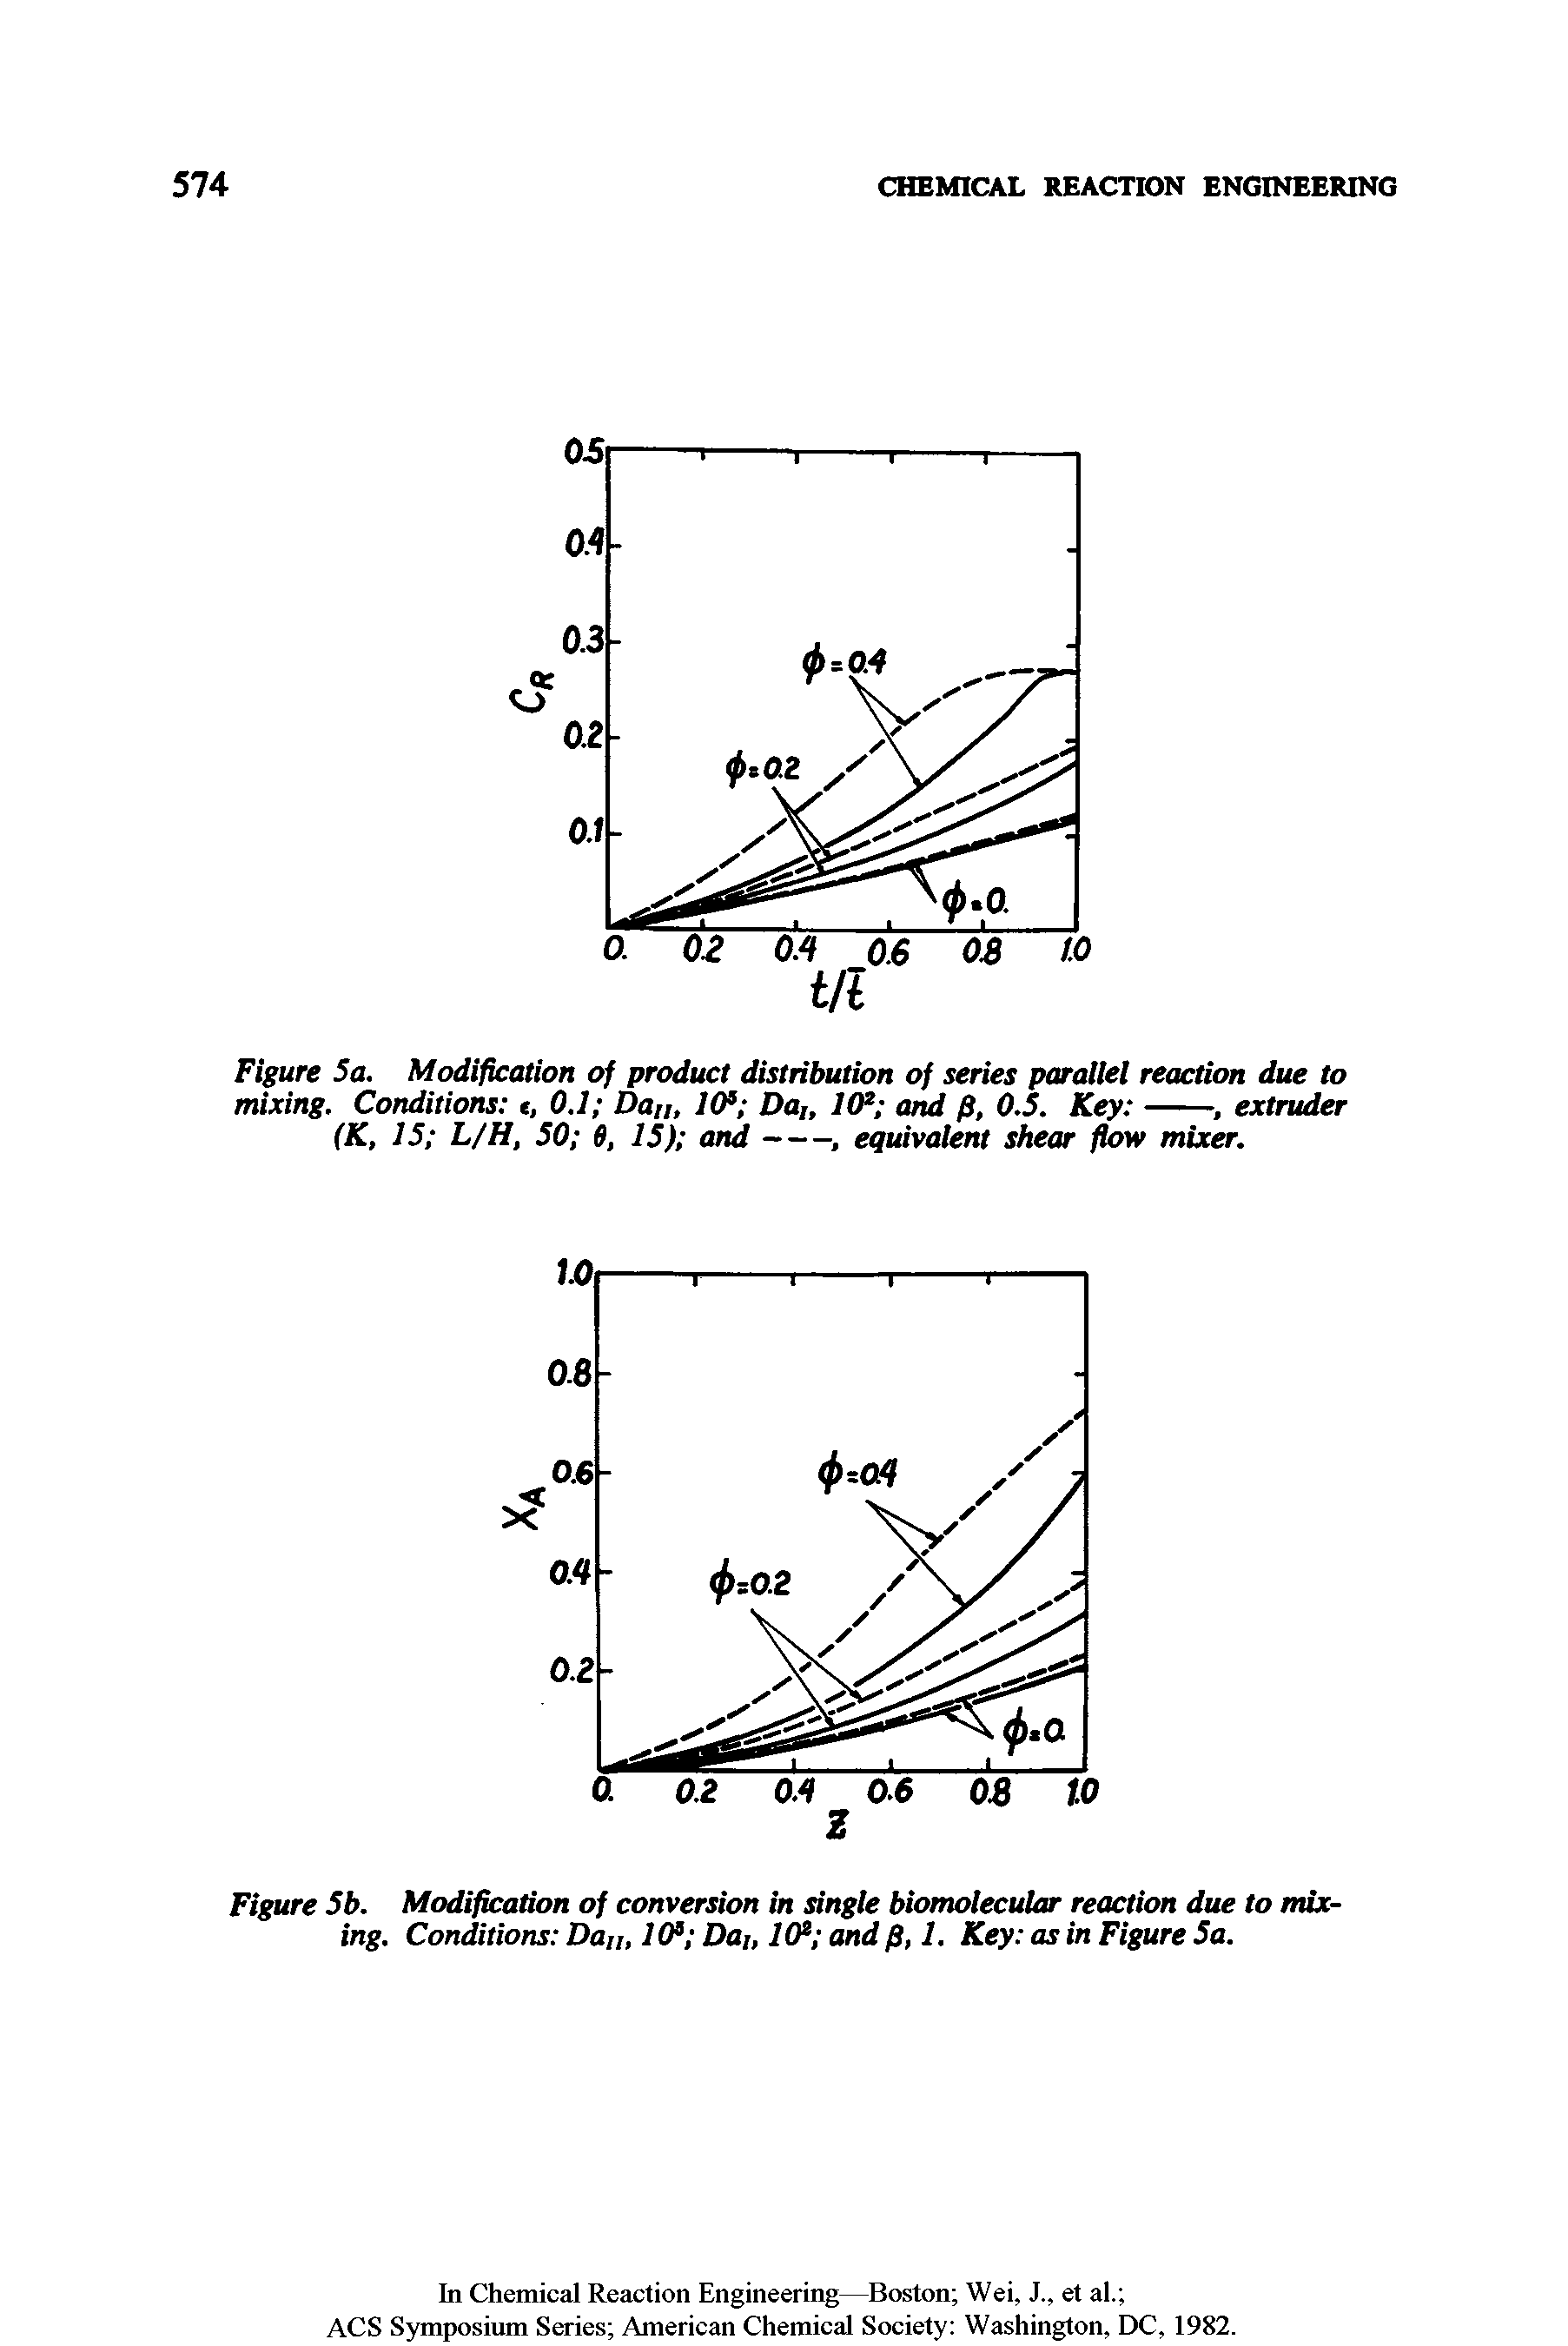 Figure 5b. Modification of conversion in single biomolecular reaction due to mixing. Conditions Da , 10s Da, 1(P and fi, 1. Key as in Figure 5a.